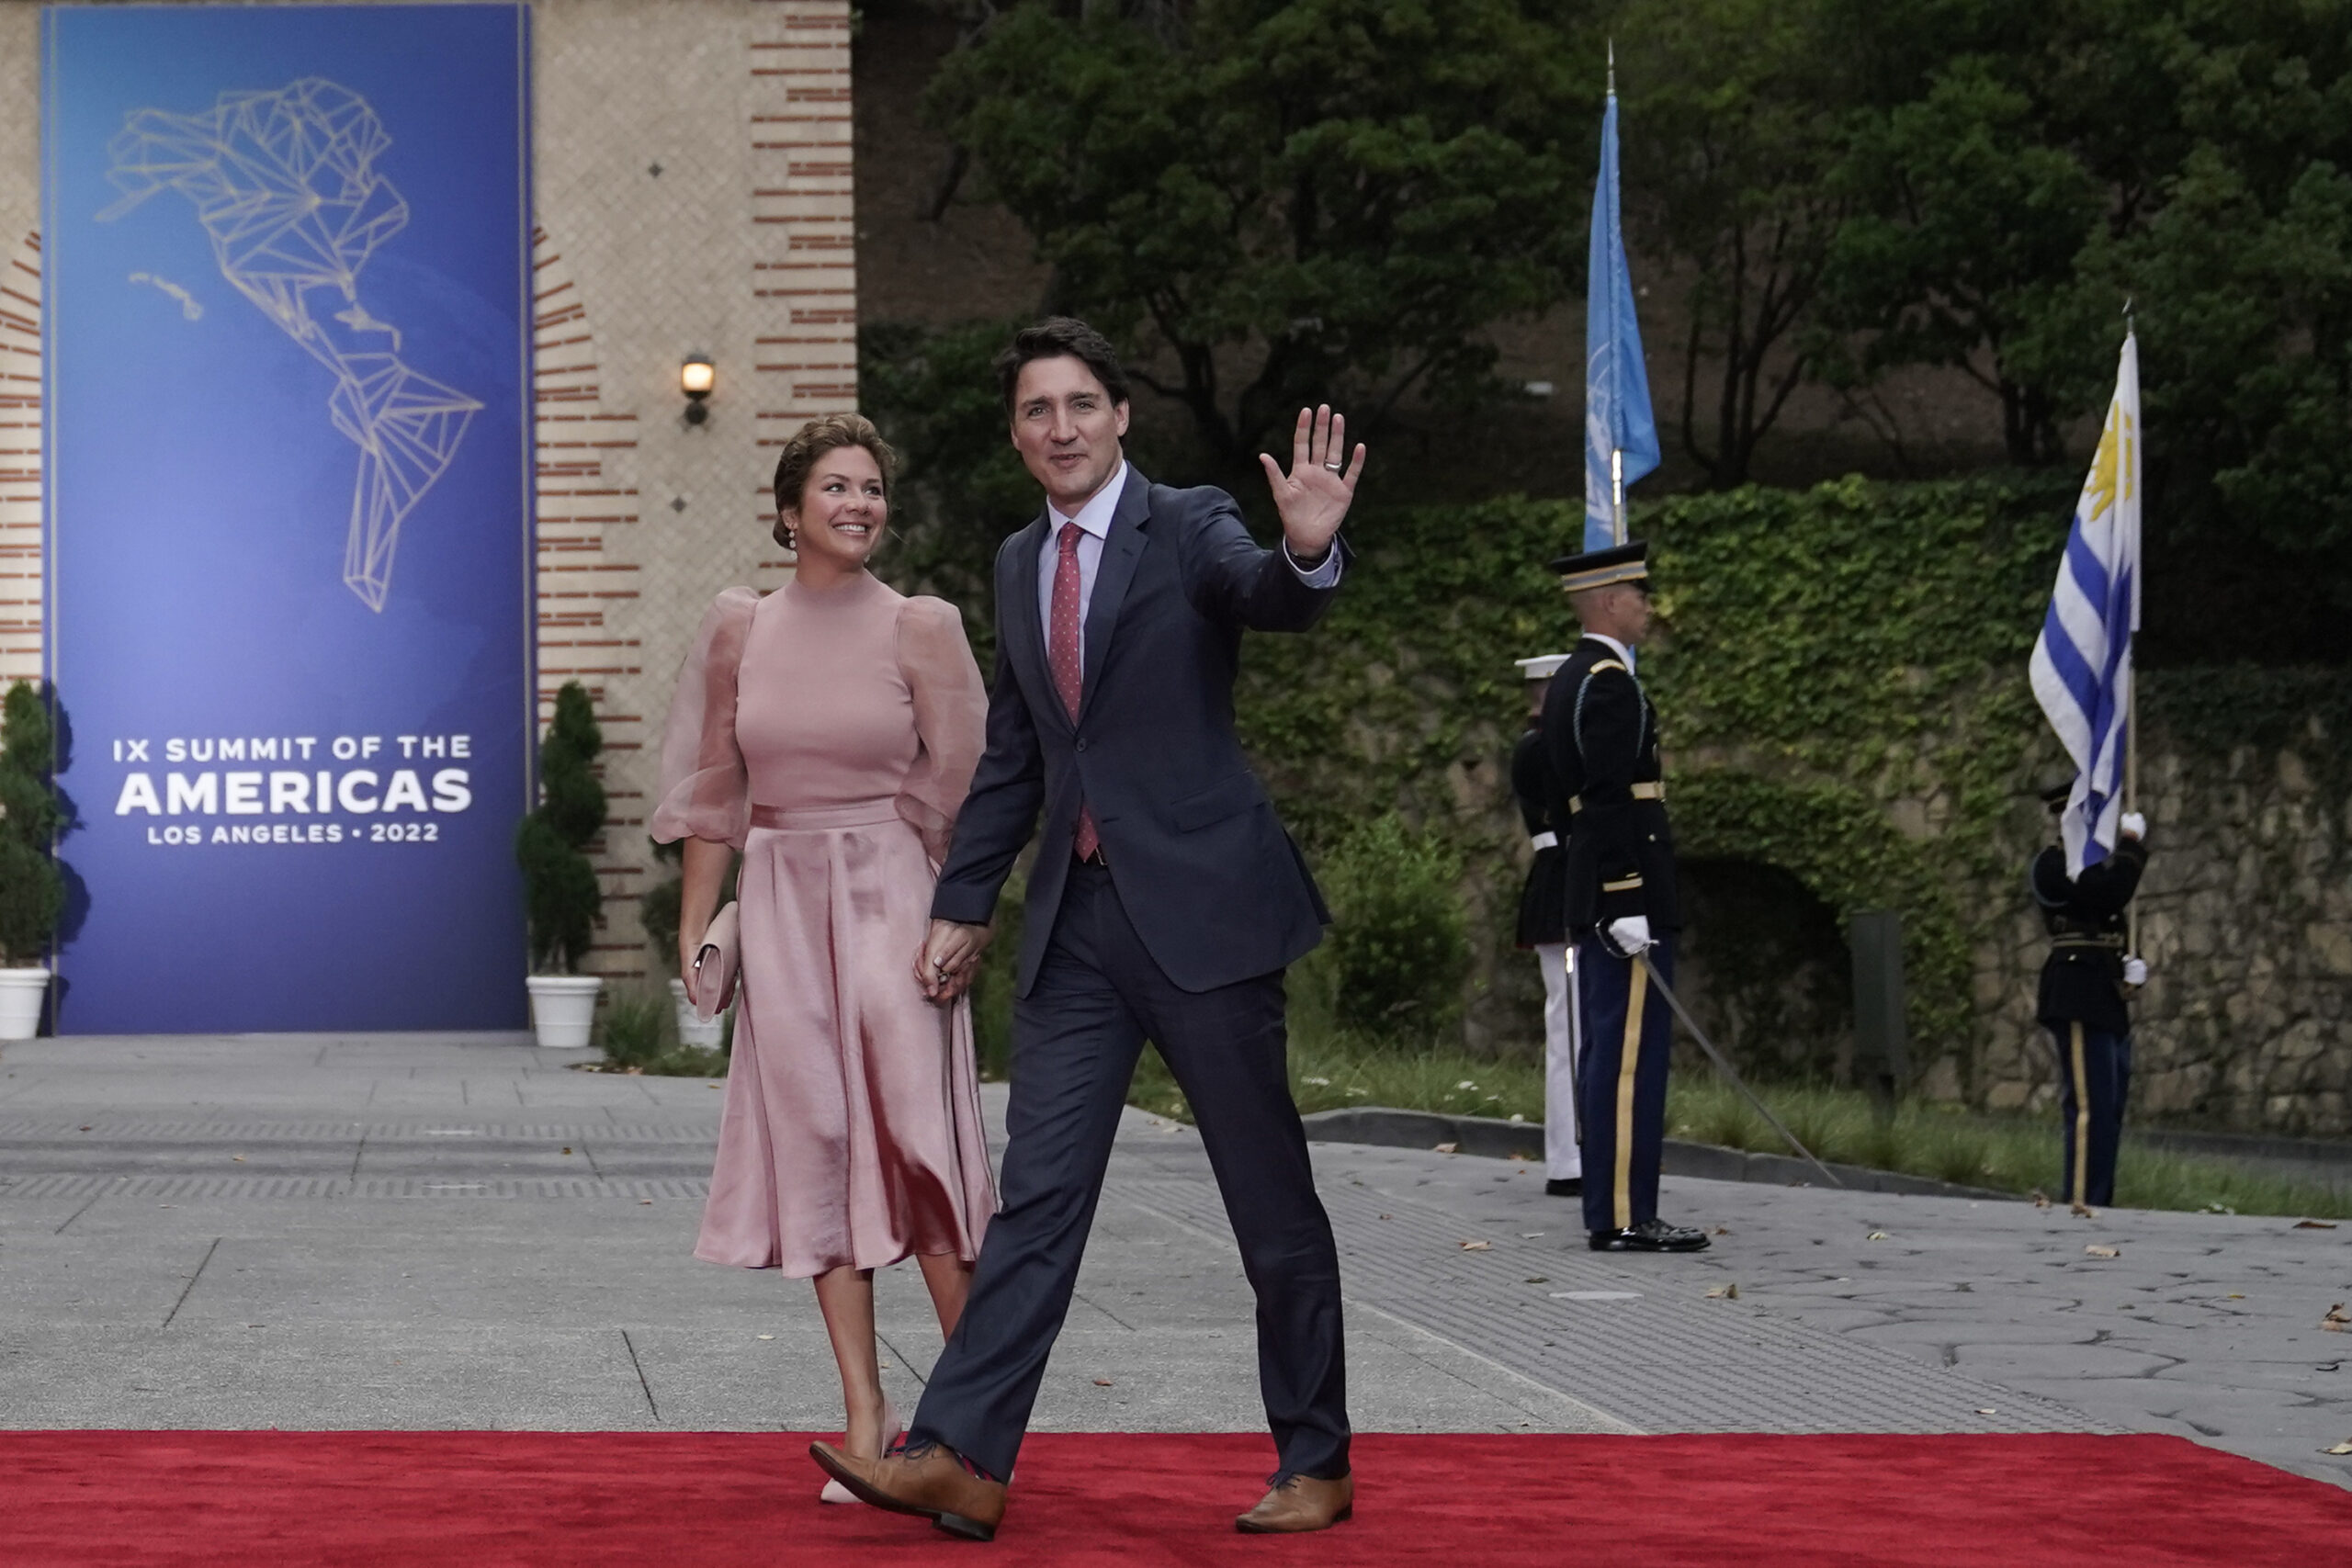 Getting used to getting separated: The Trudeaus’ split isn’t the outlier it once was